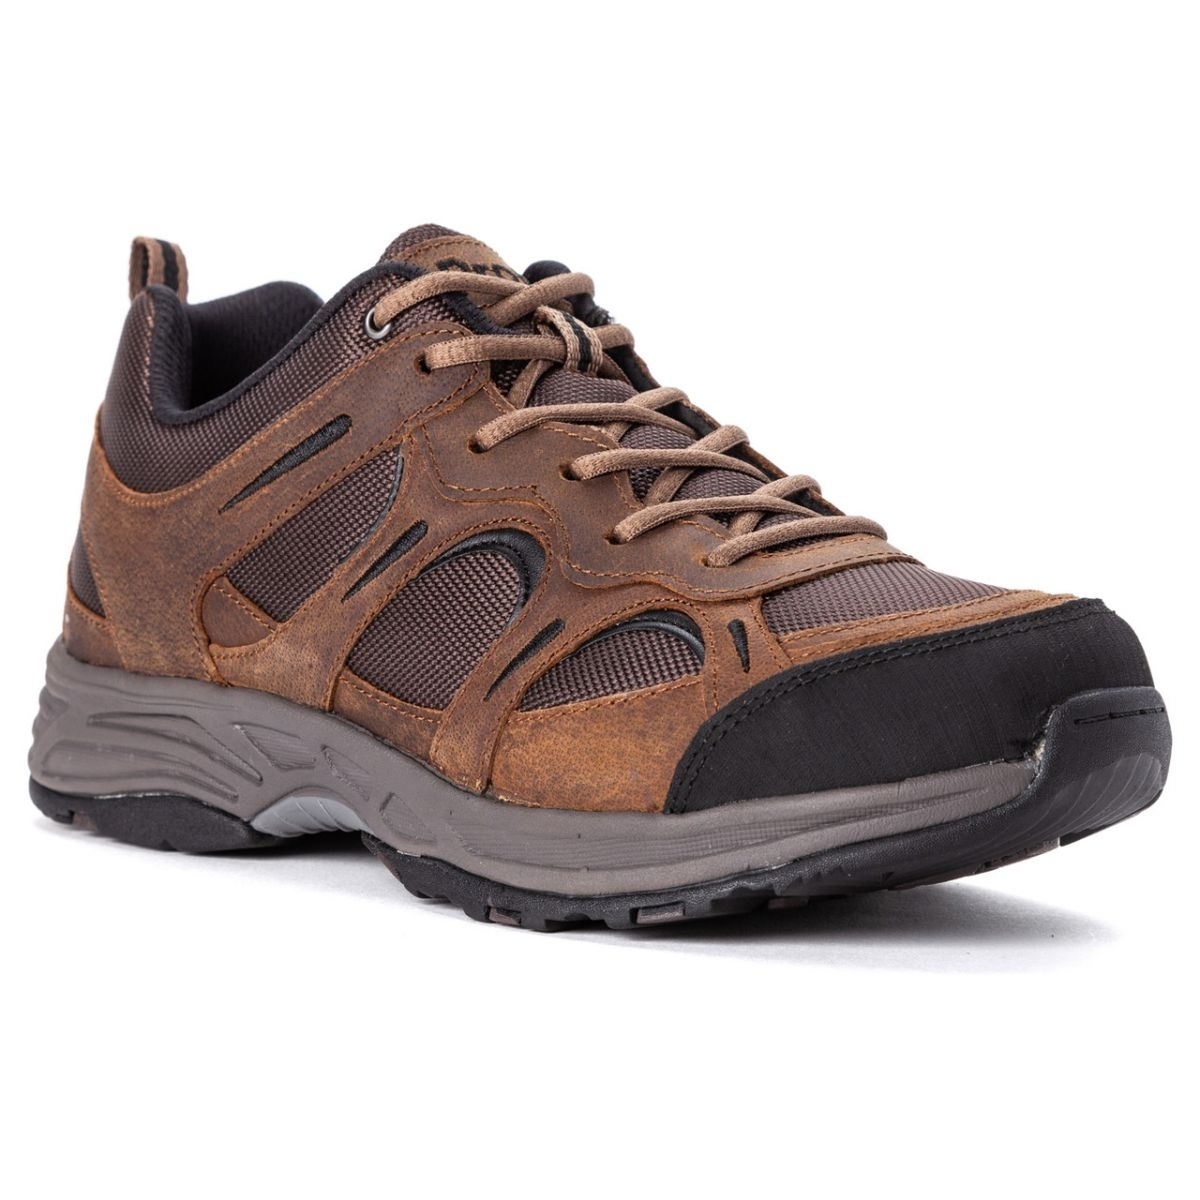 Propet Men's Connelly Hiking Shoe Brown - M5503BR BROWN - BROWN, 13-E